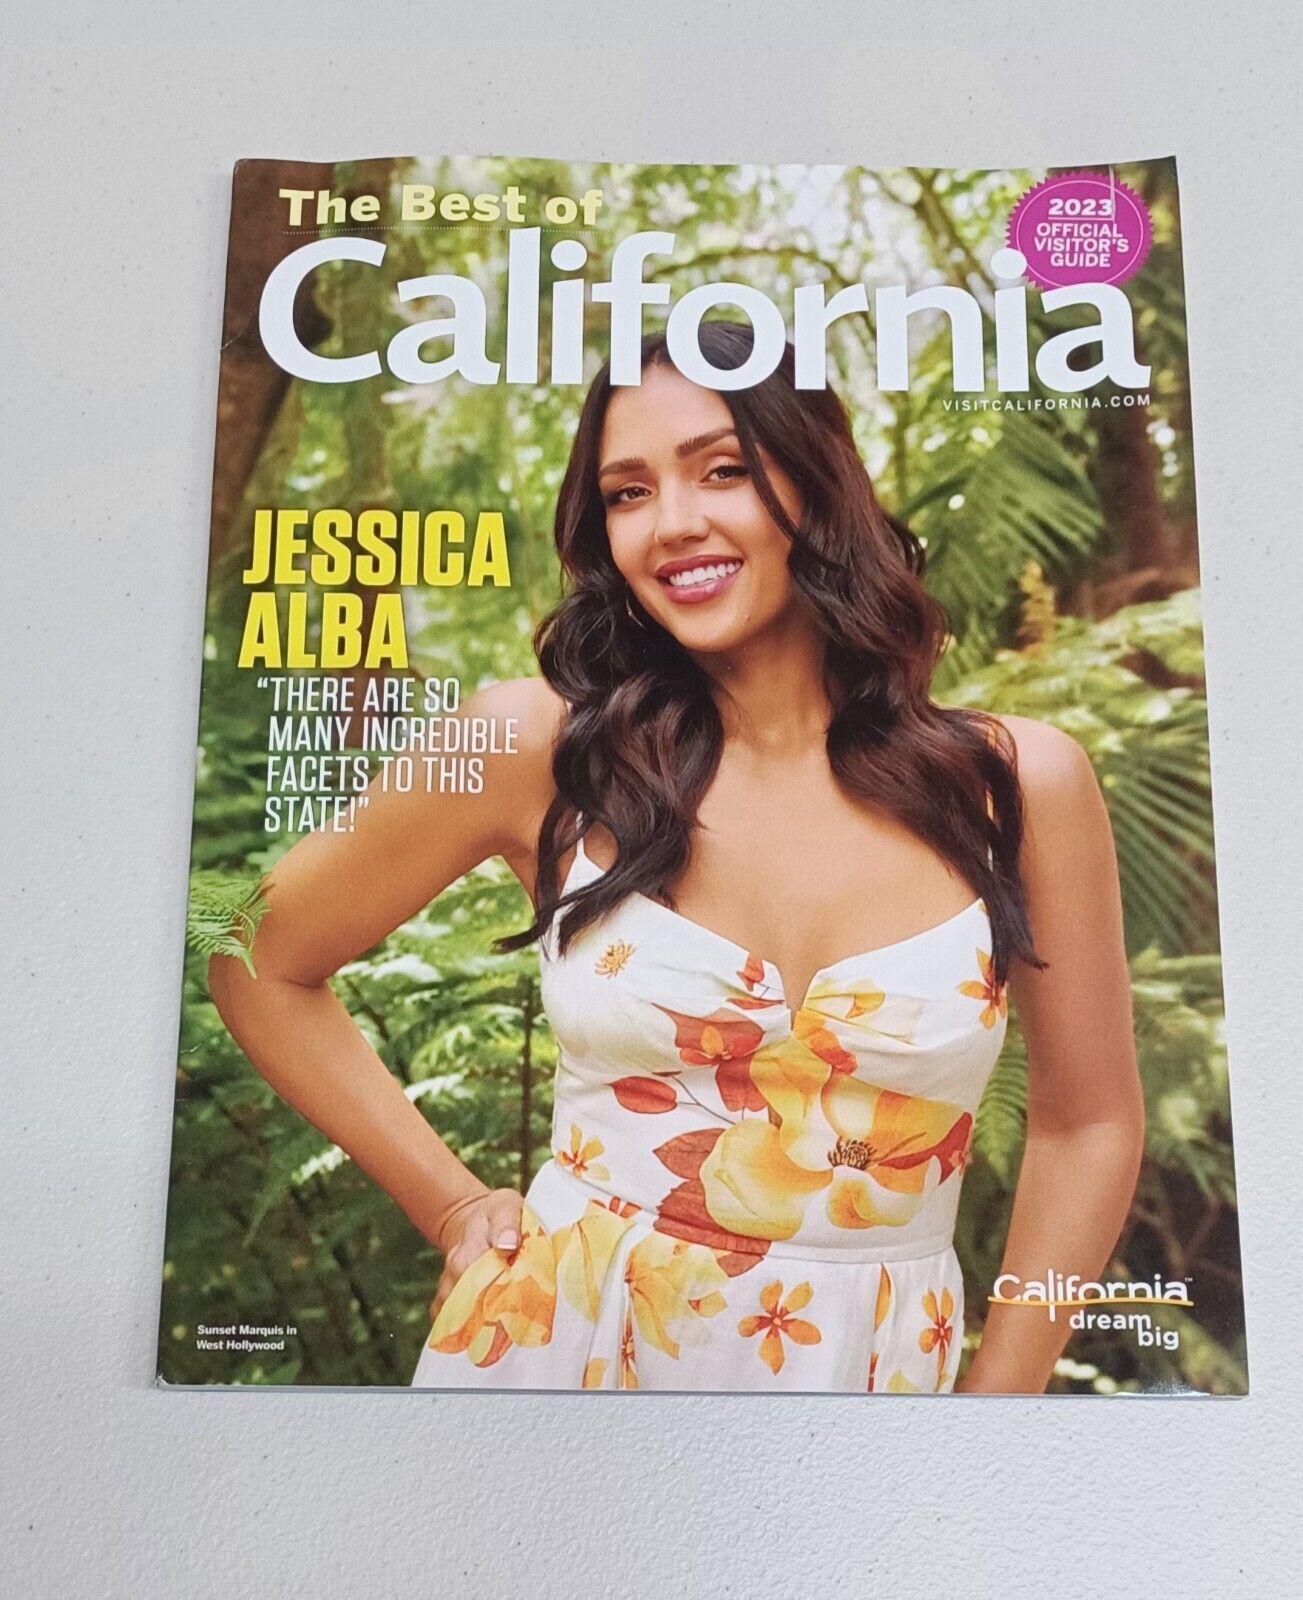 California Official 2023 Visitor's Guide 192 Full-Color Pages *JESSICA ALBA*